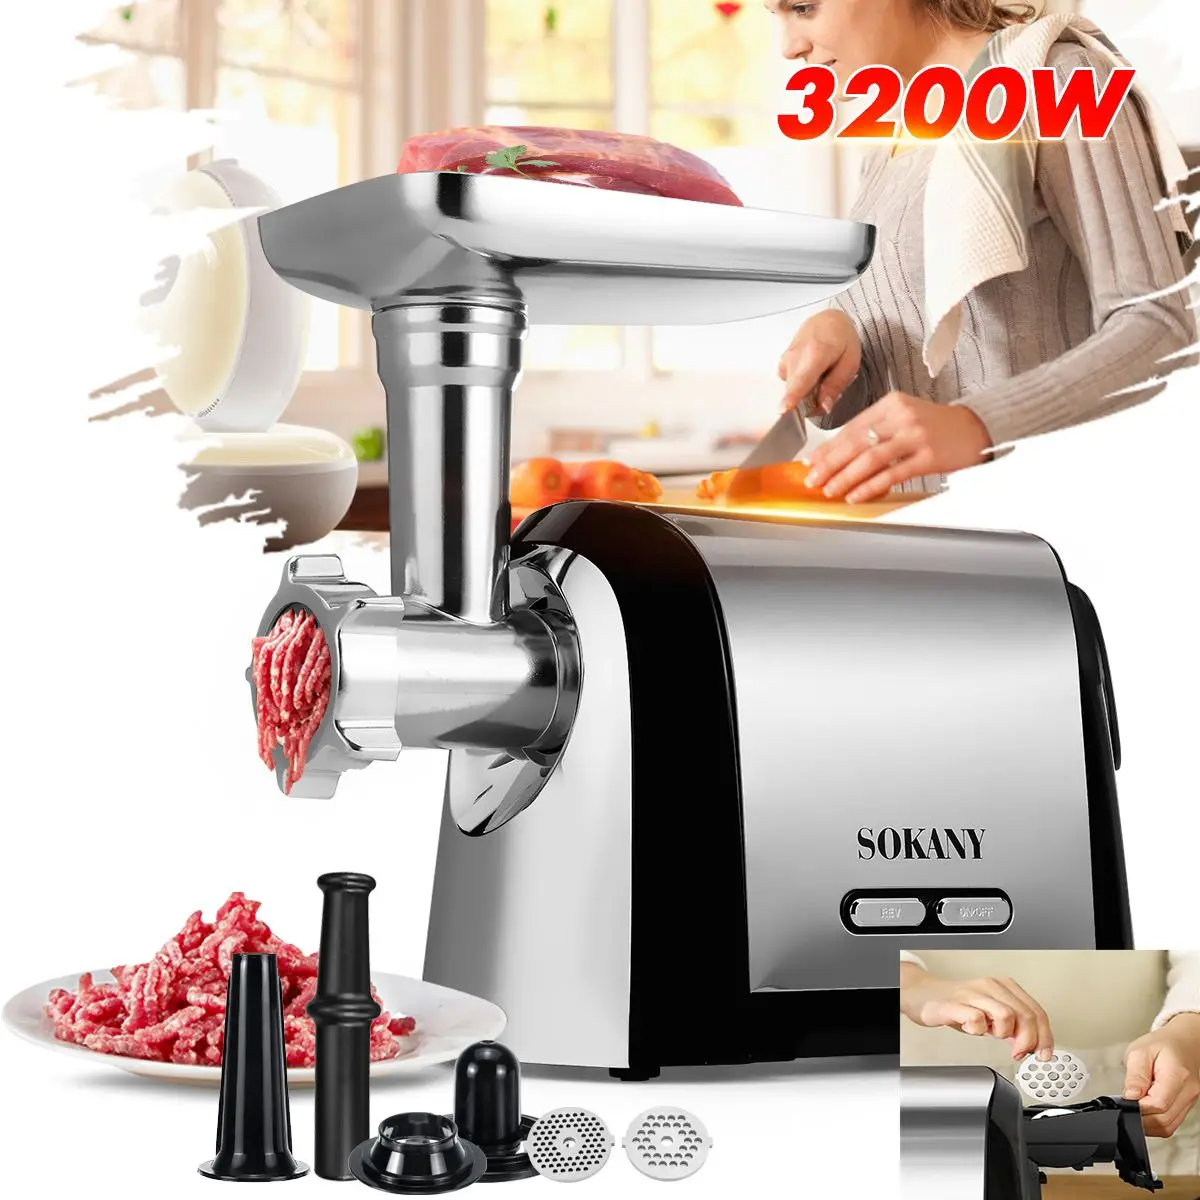 

3200W Electric Meat Grinders food mixer blender Stainless Steel Home appliances Mincing Sausage Stuffer Heavy Dut food processor